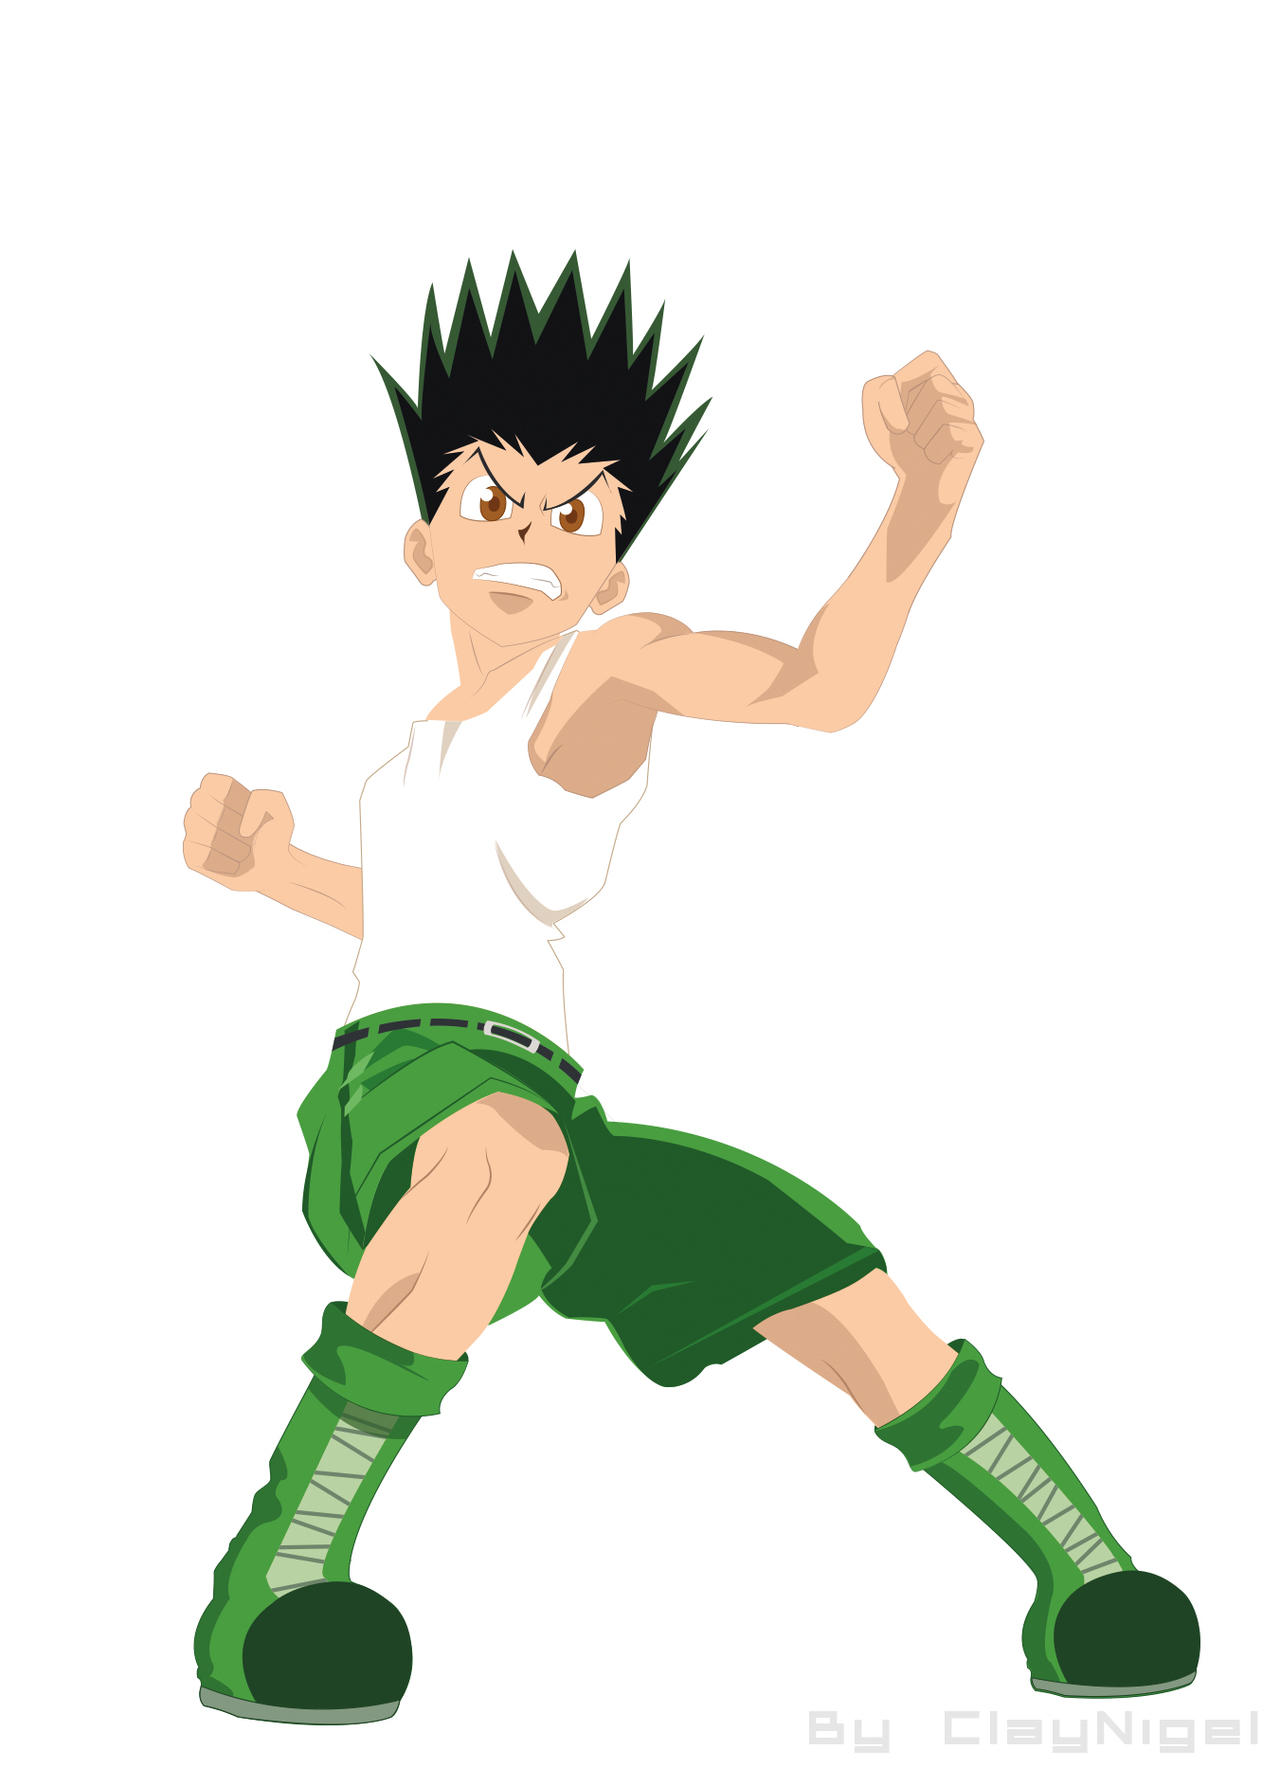 Gon Vector by Deathirst on deviantART  Hunter anime, Anime characters, Hunter  x hunter